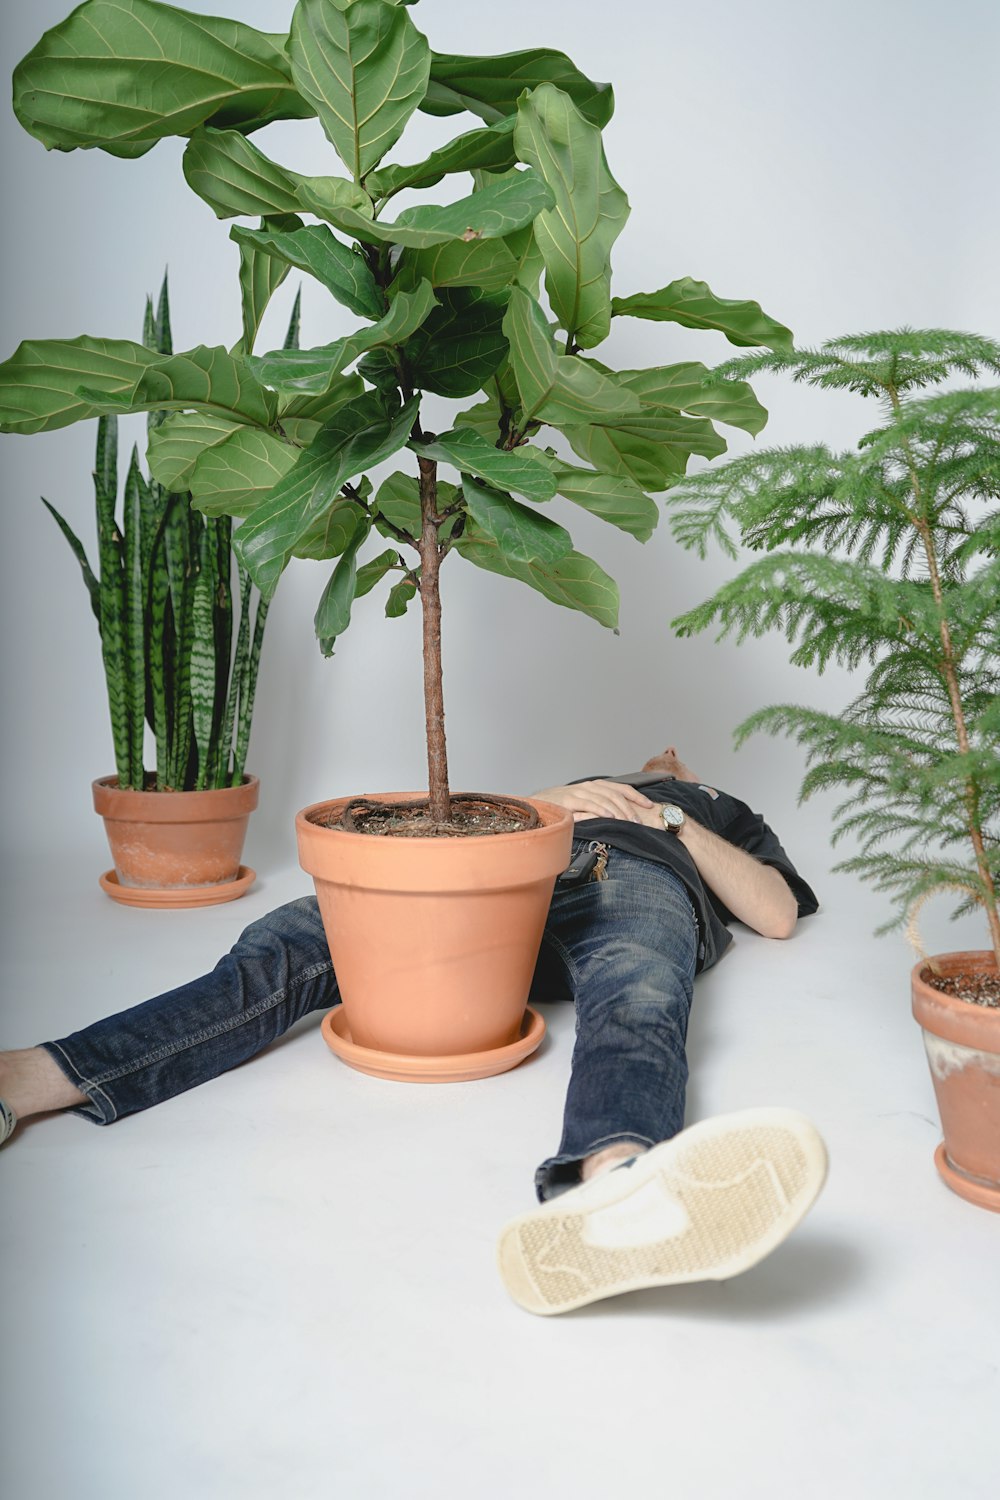 person in blue denim jeans and white sneakers sitting beside green plant